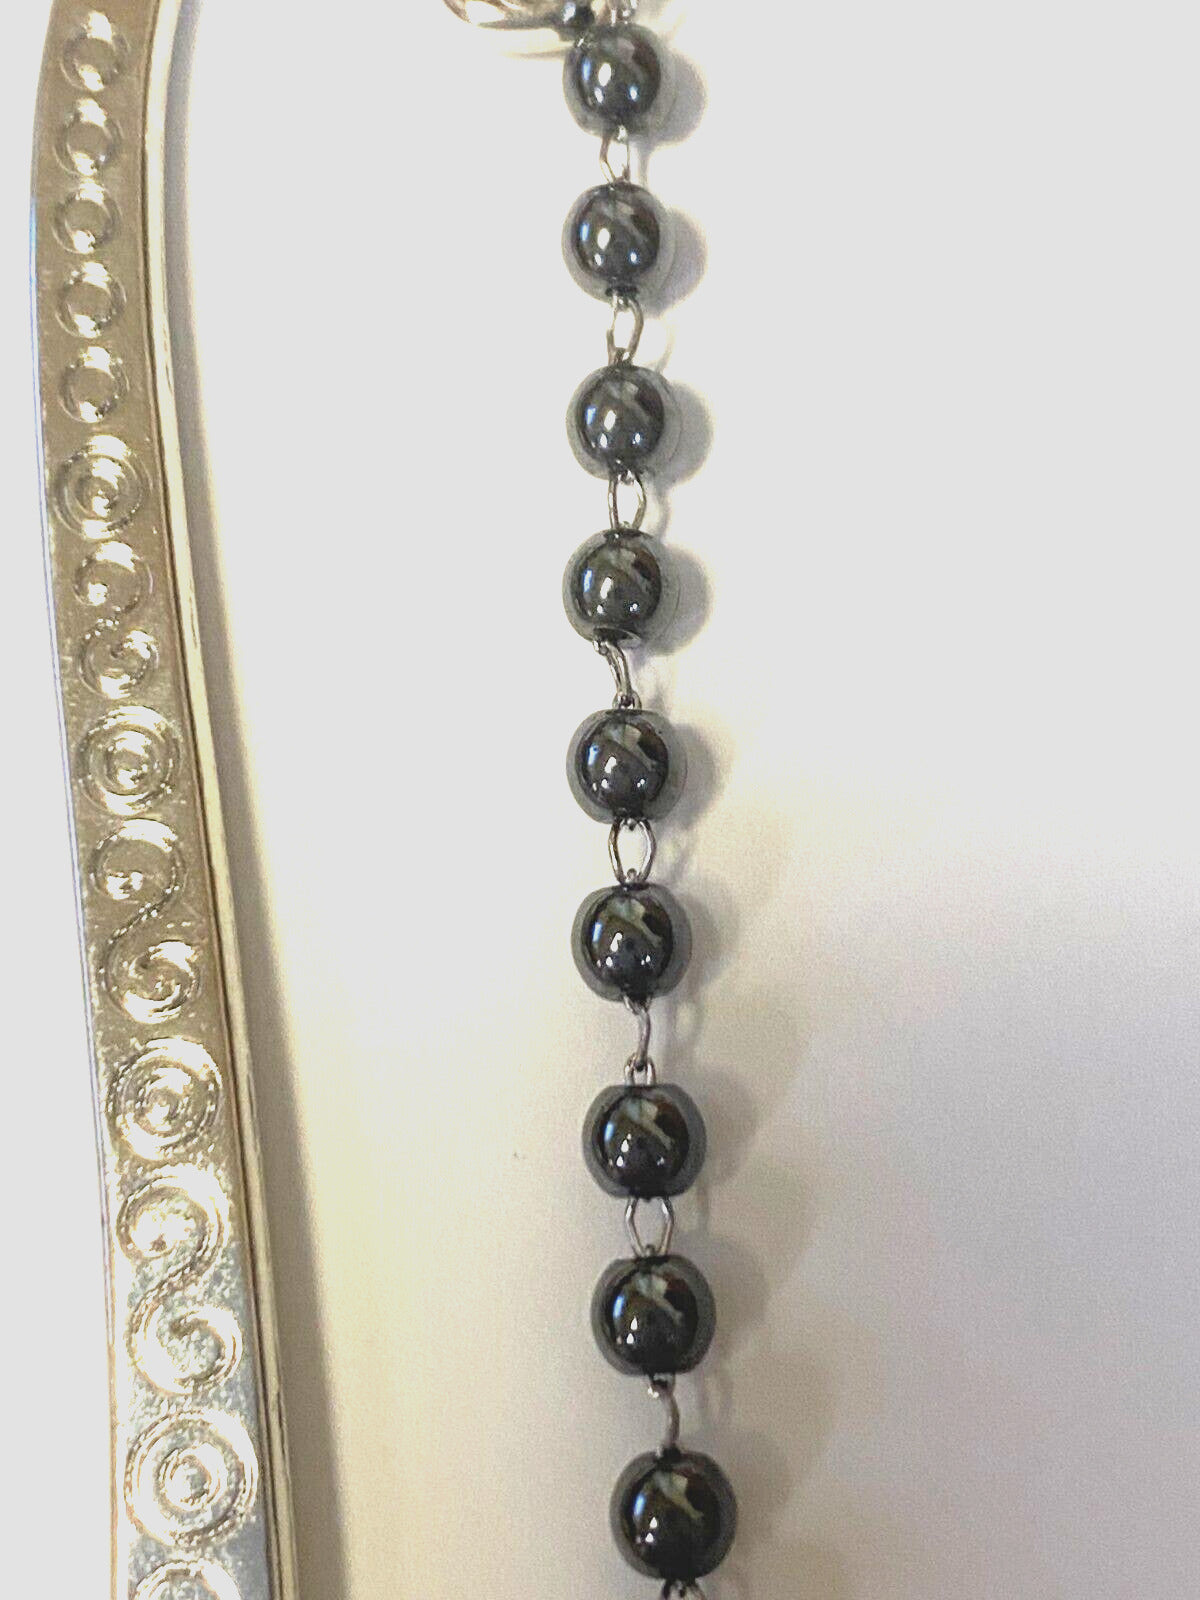 One Decade Hematite Rosary Bookmarker with Our Lady of Miraculous Medal, New - Bob and Penny Lord